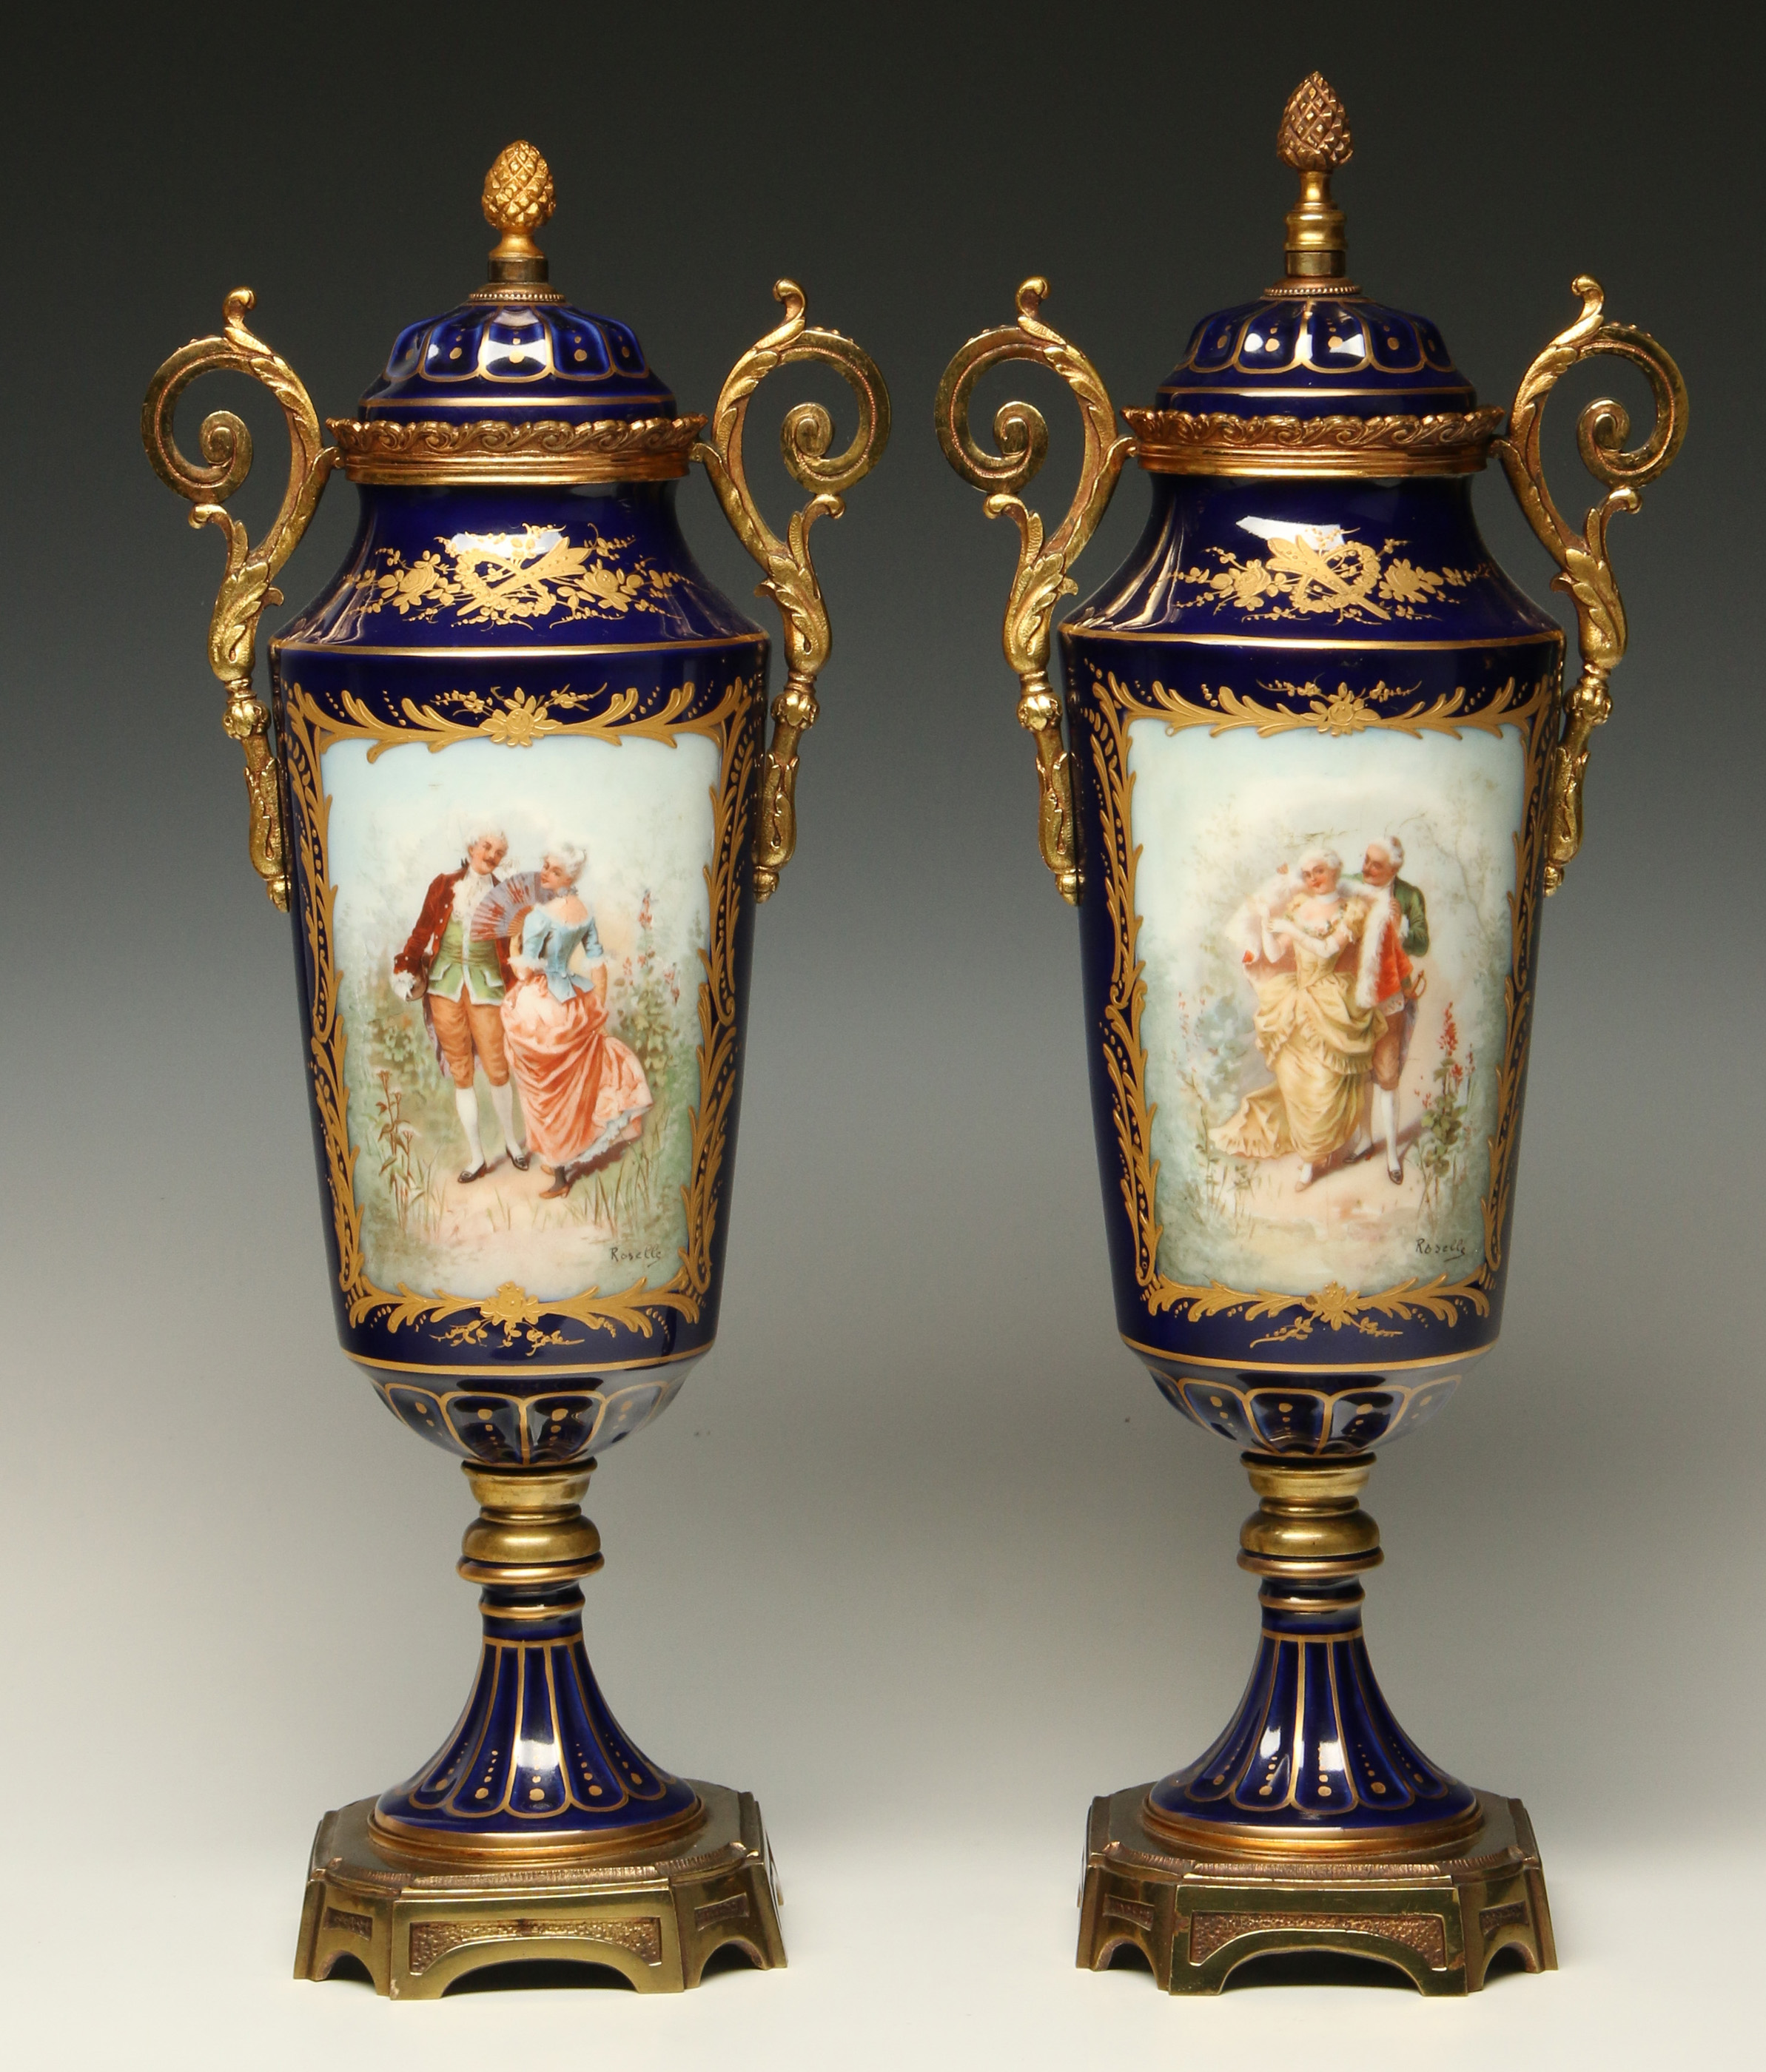 A PAIR OF CIRCA 1900 SEVRES STYLE PORCELAIN URNS